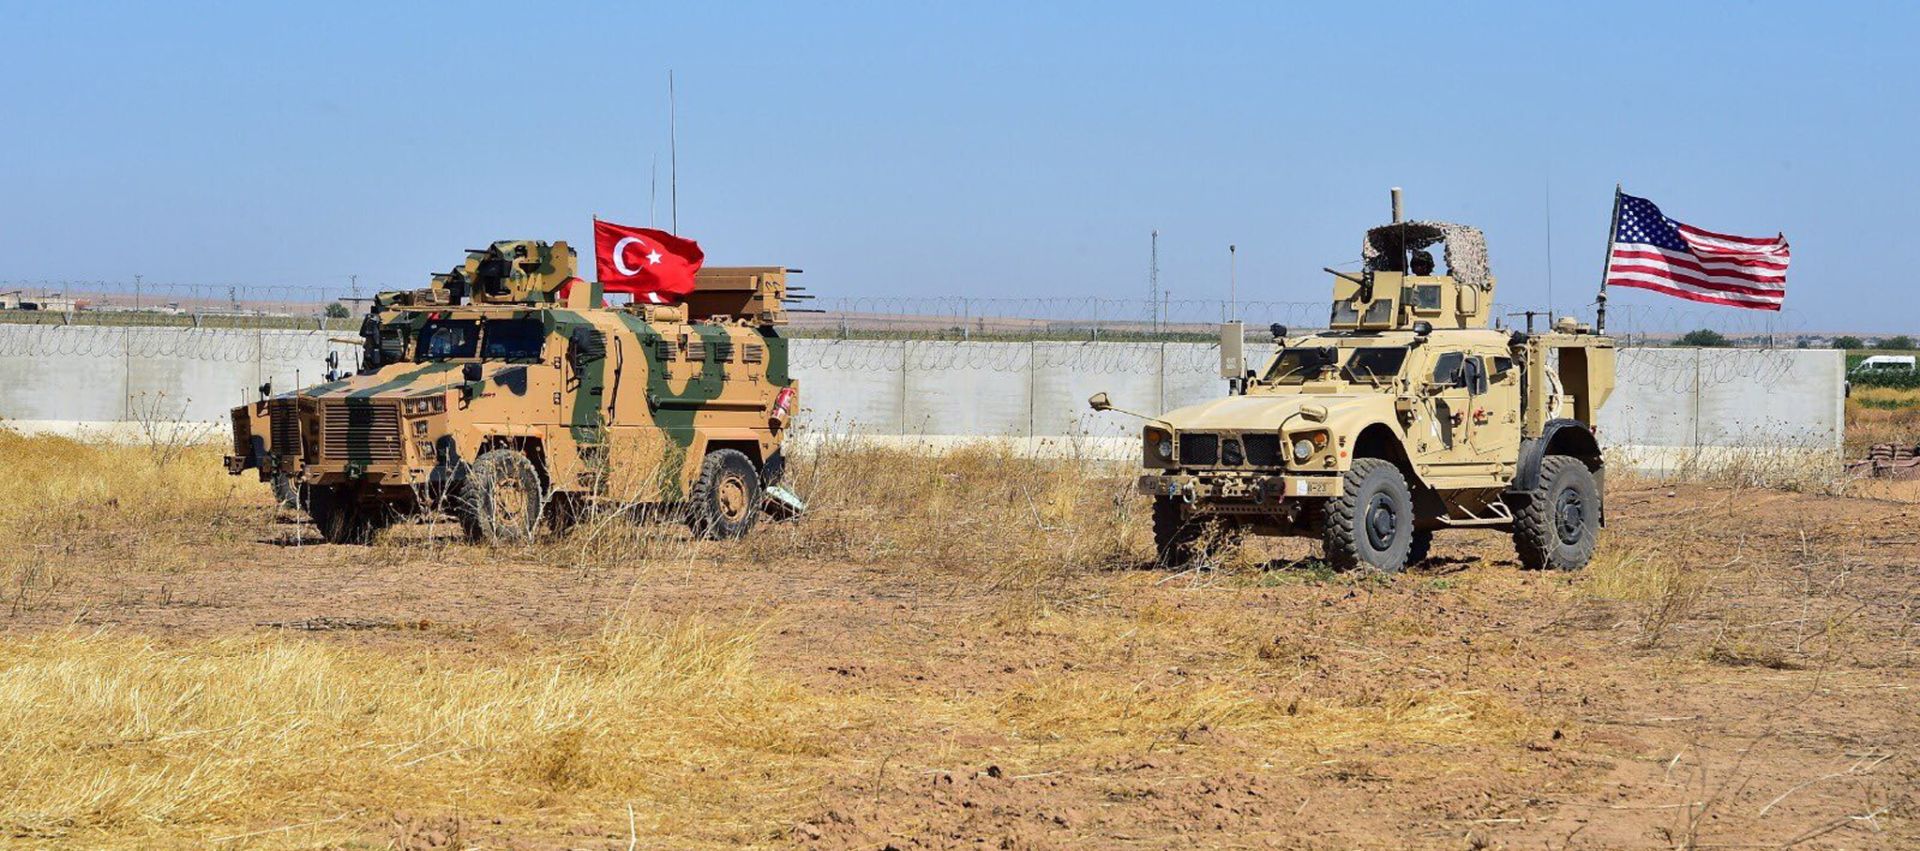 epa07865128 A handout photo made available by the Turkish Minister of Defence Press Office shows Turkish army vehicles driving back to Turkish territories after taking part in the second Turkish and US army ground patrol in Northern Syria, in Tal Abyad city, near Akcakale district in Sanliurfa, Turkey, 24 September 2019. Turkey and the US began joint patrols in northern Syria in order to establish a safe zone.  EPA/TURKISH MINISTRY OF DEFENCE HANDOUT  HANDOUT EDITORIAL USE ONLY/NO SALES